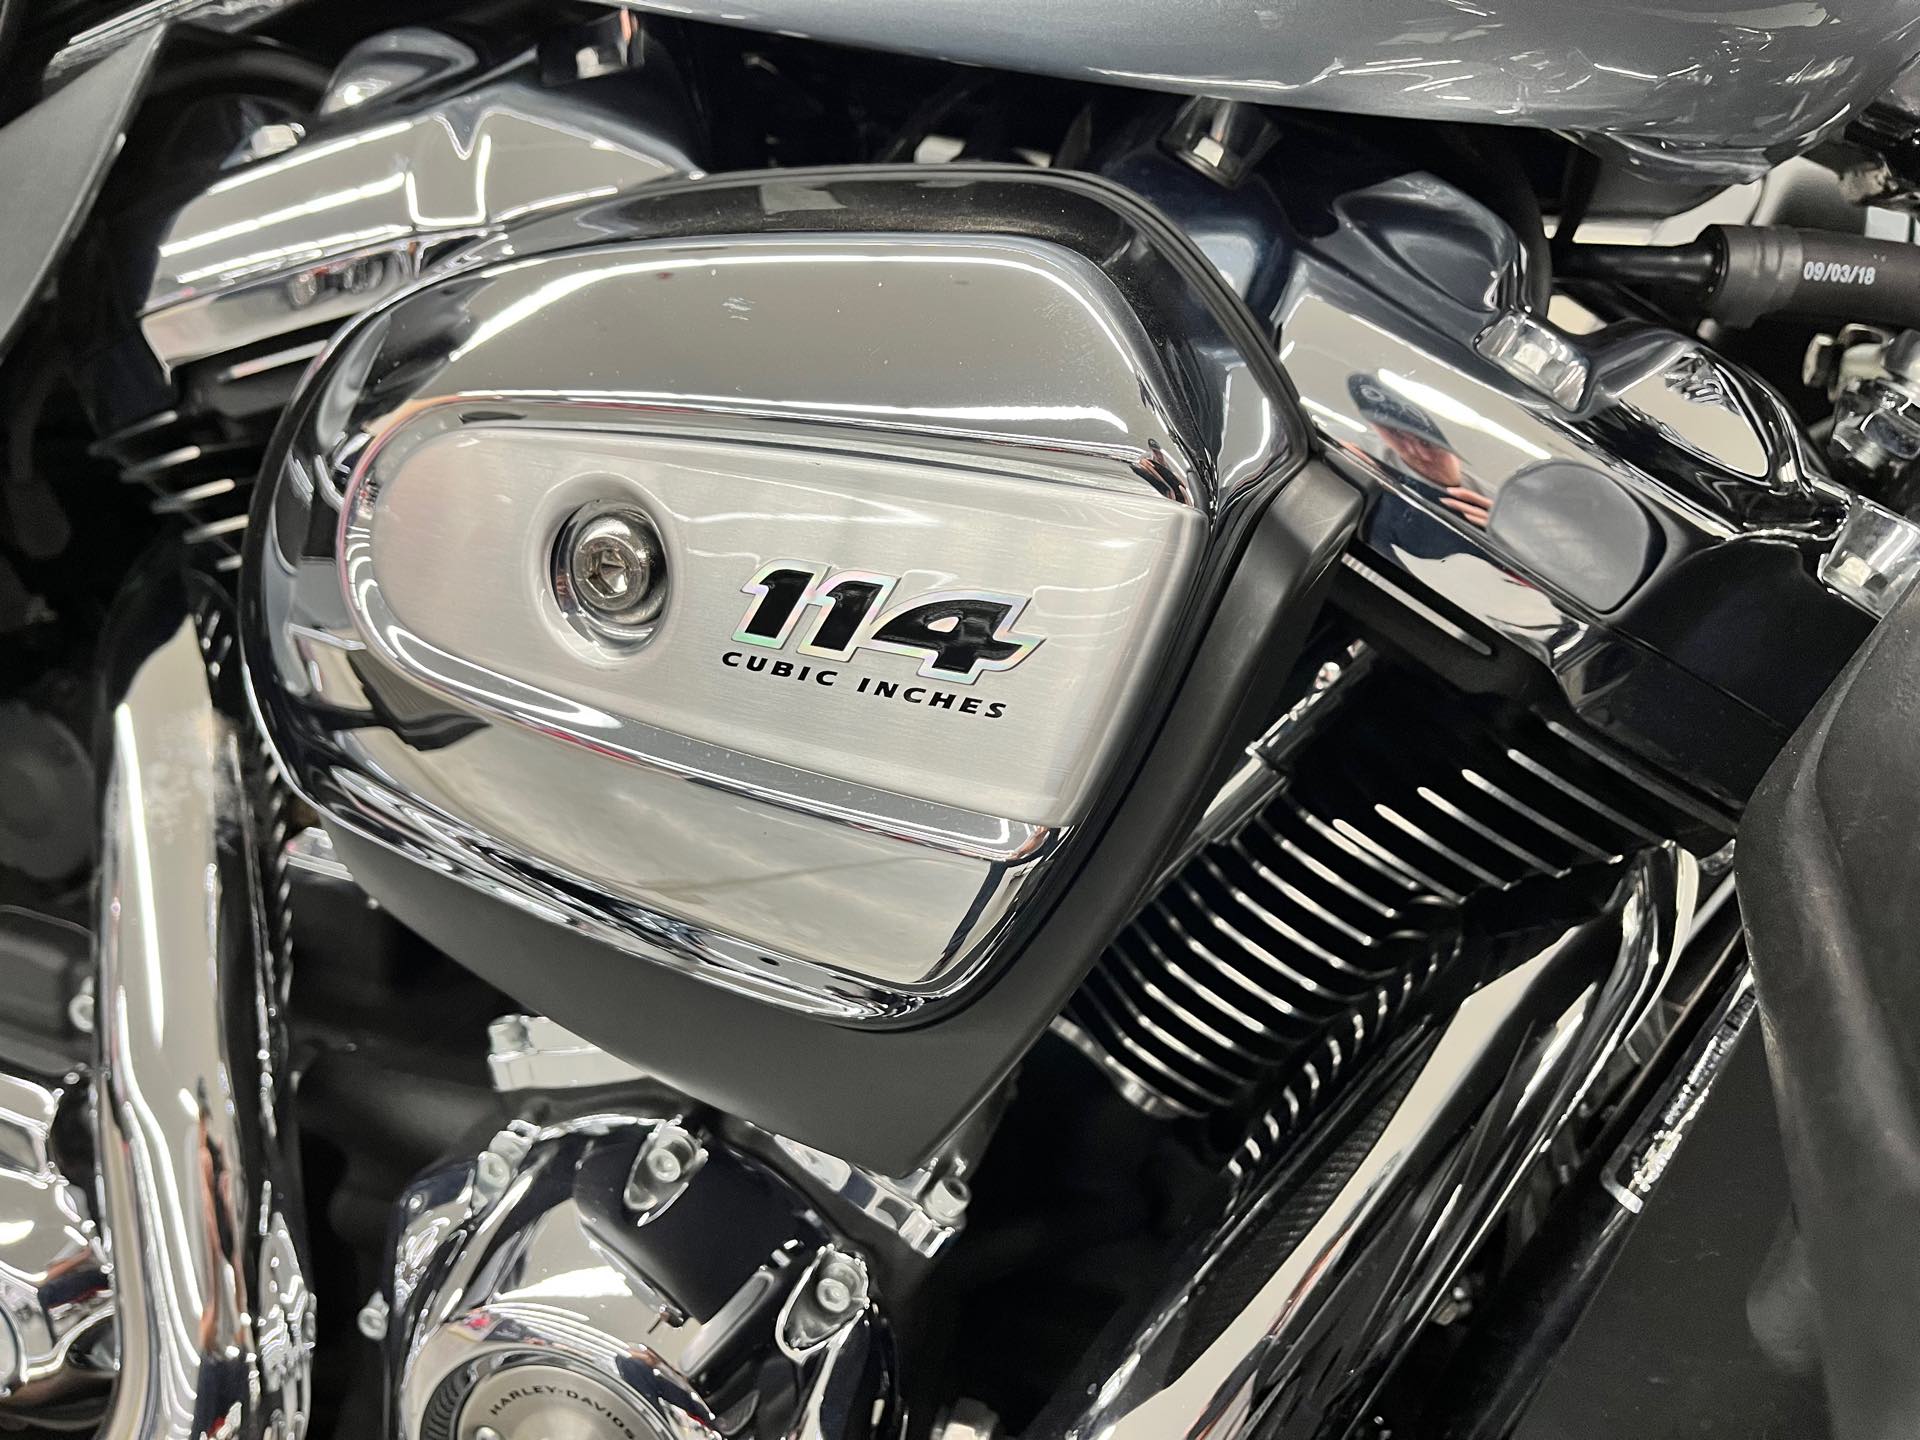 2019 Harley-Davidson Electra Glide Ultra Limited Low at Aces Motorcycles - Denver